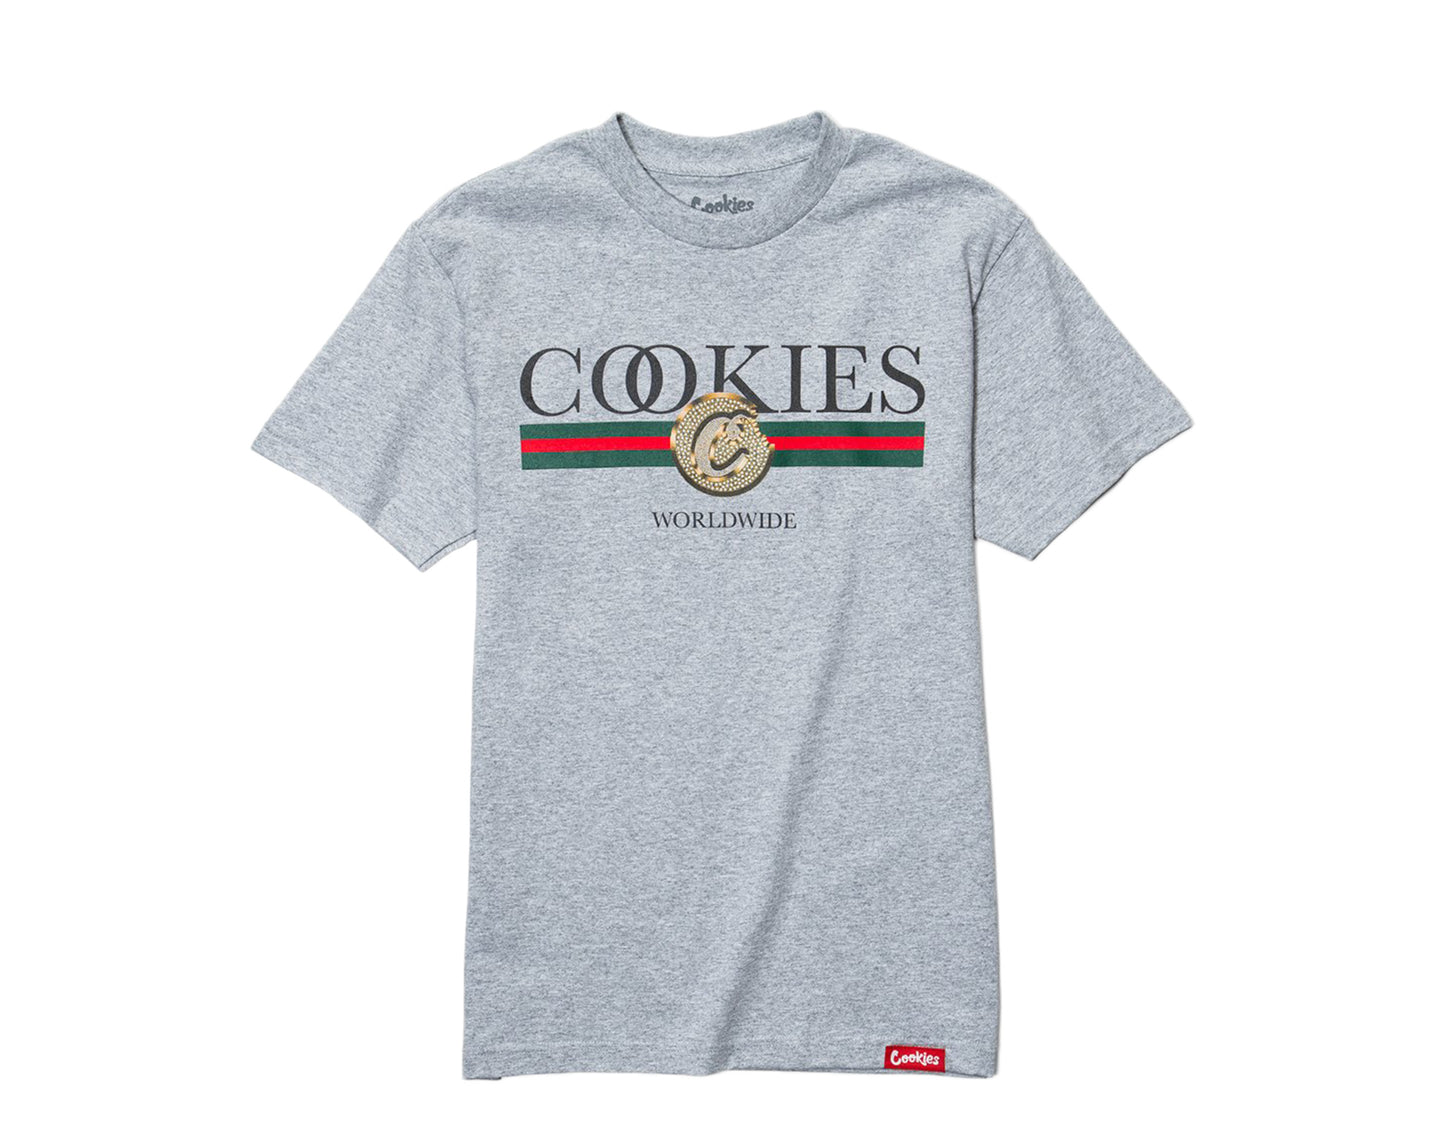 Cookies Lifestyle Heather Grey Men's Tee Shirt 1543T3972-HGY